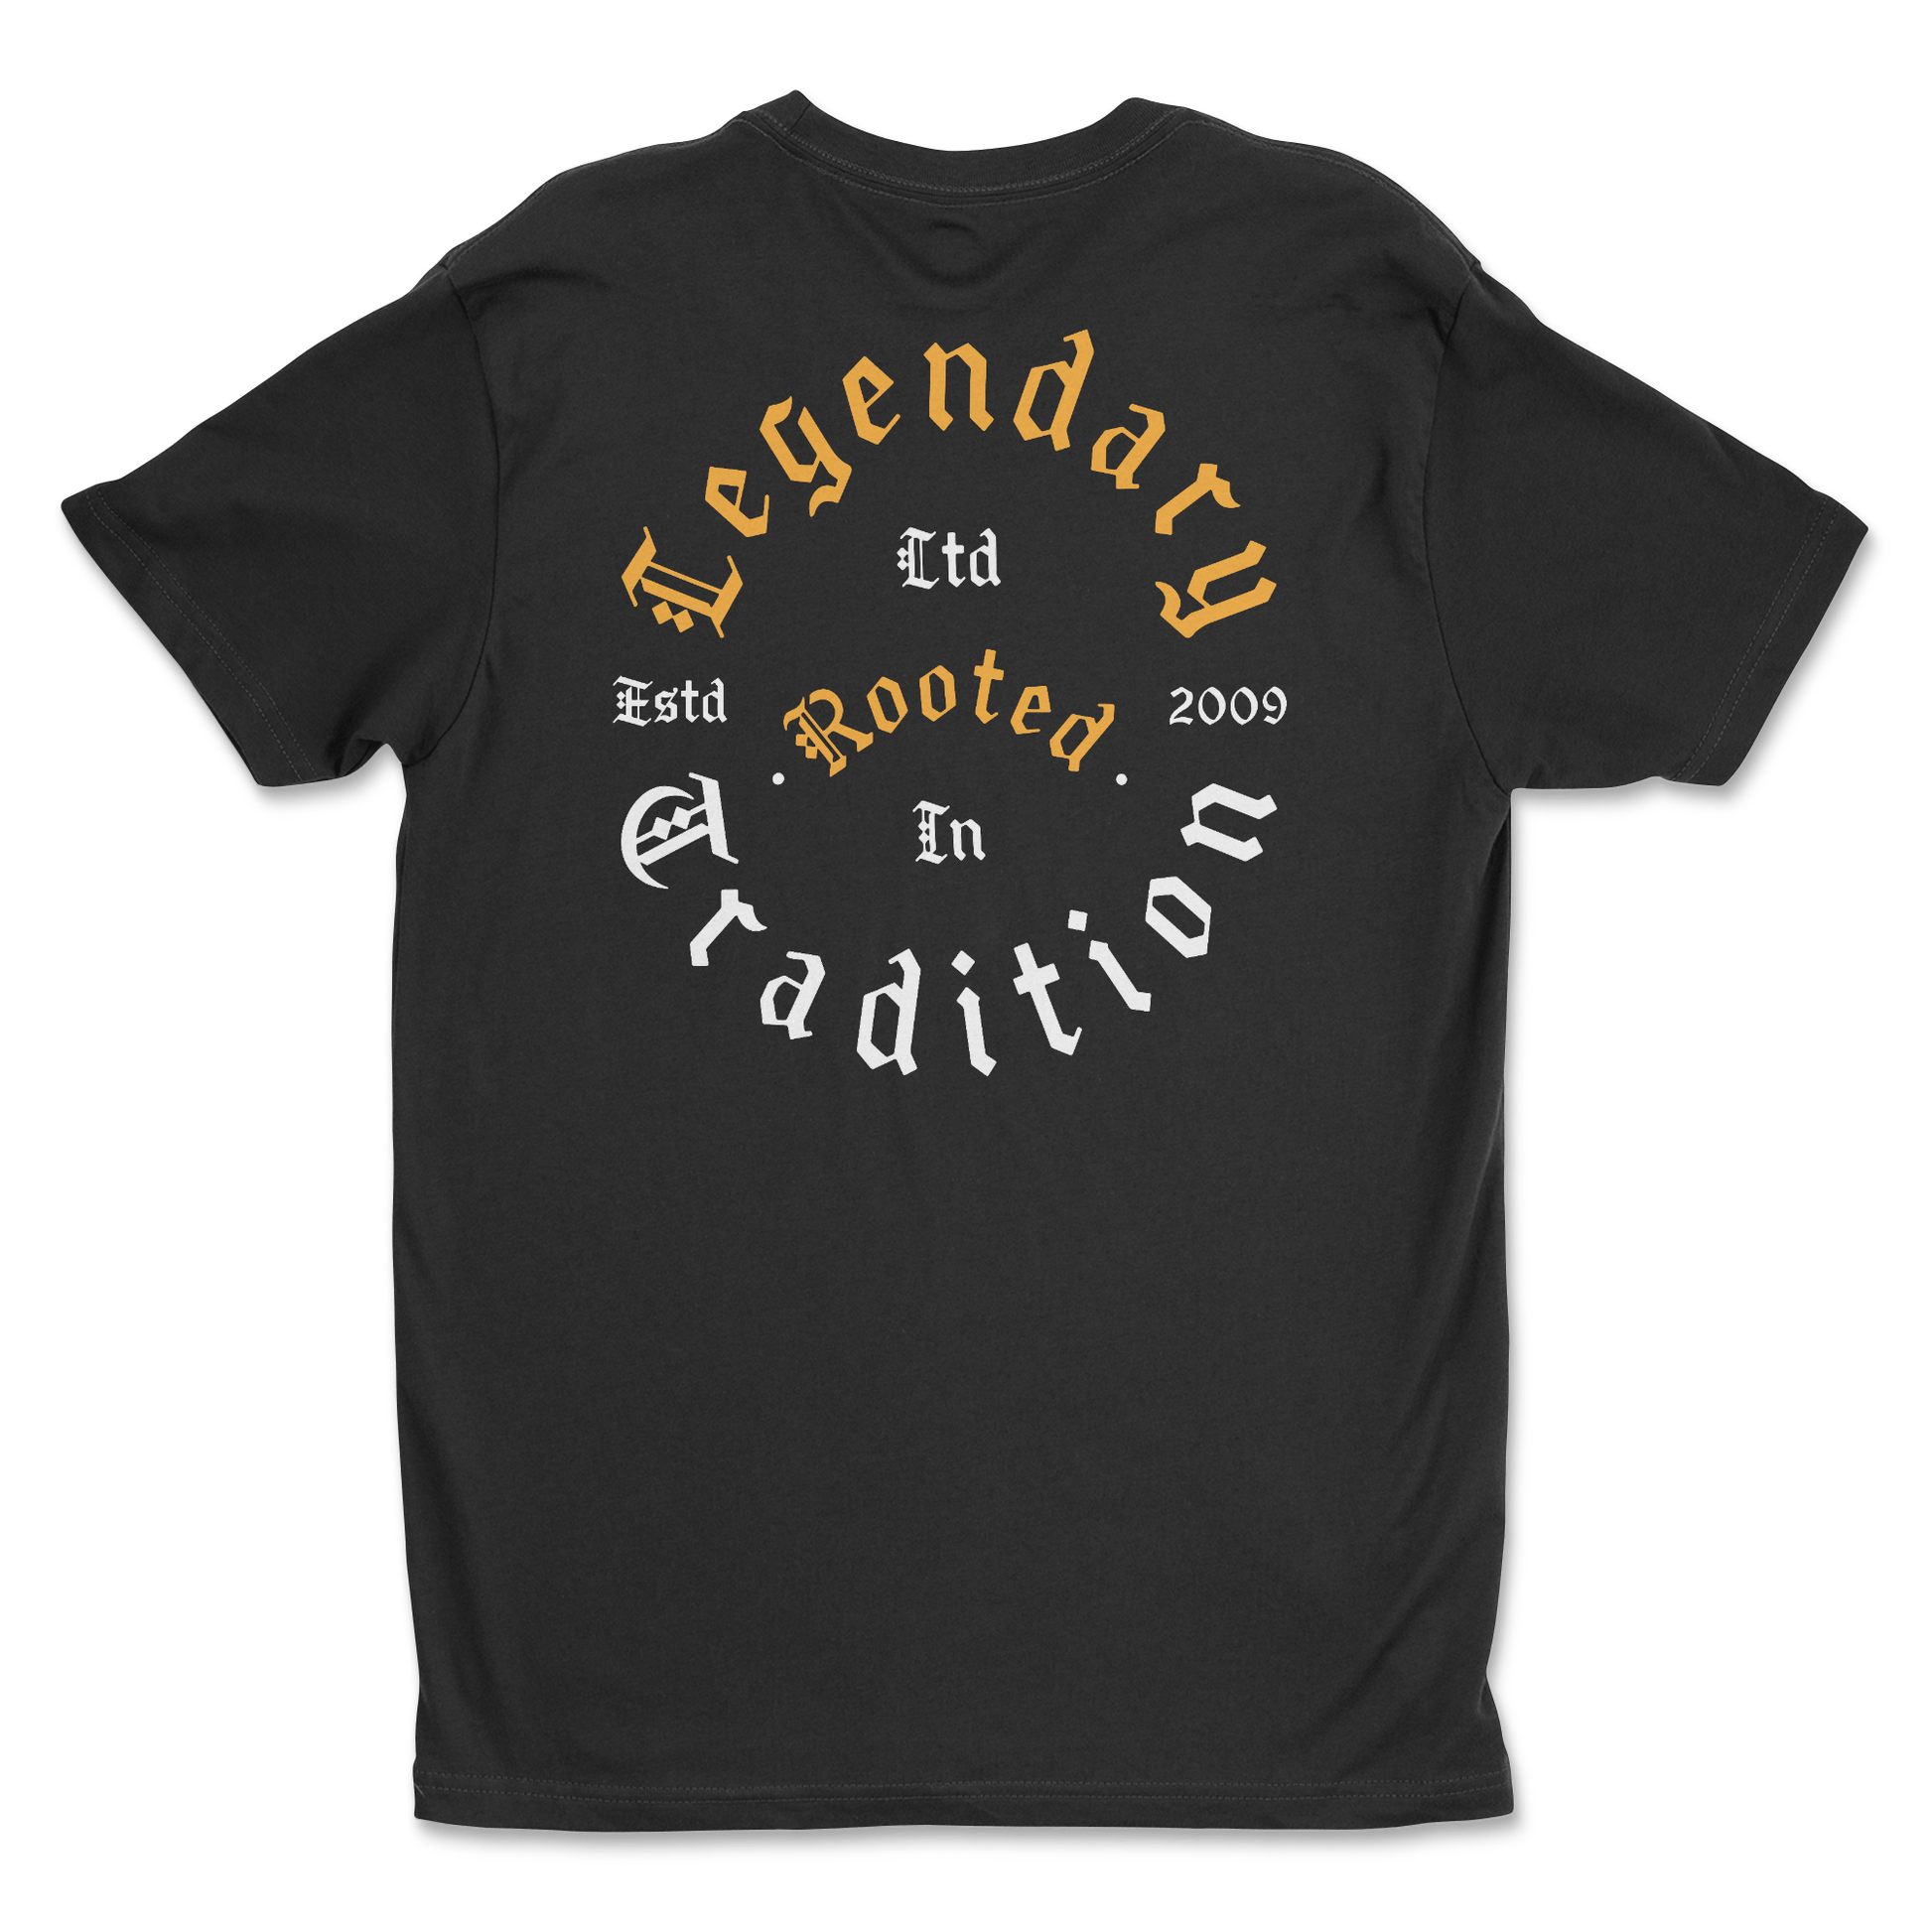 Legendary ltd. Rooted in Tradition Tee